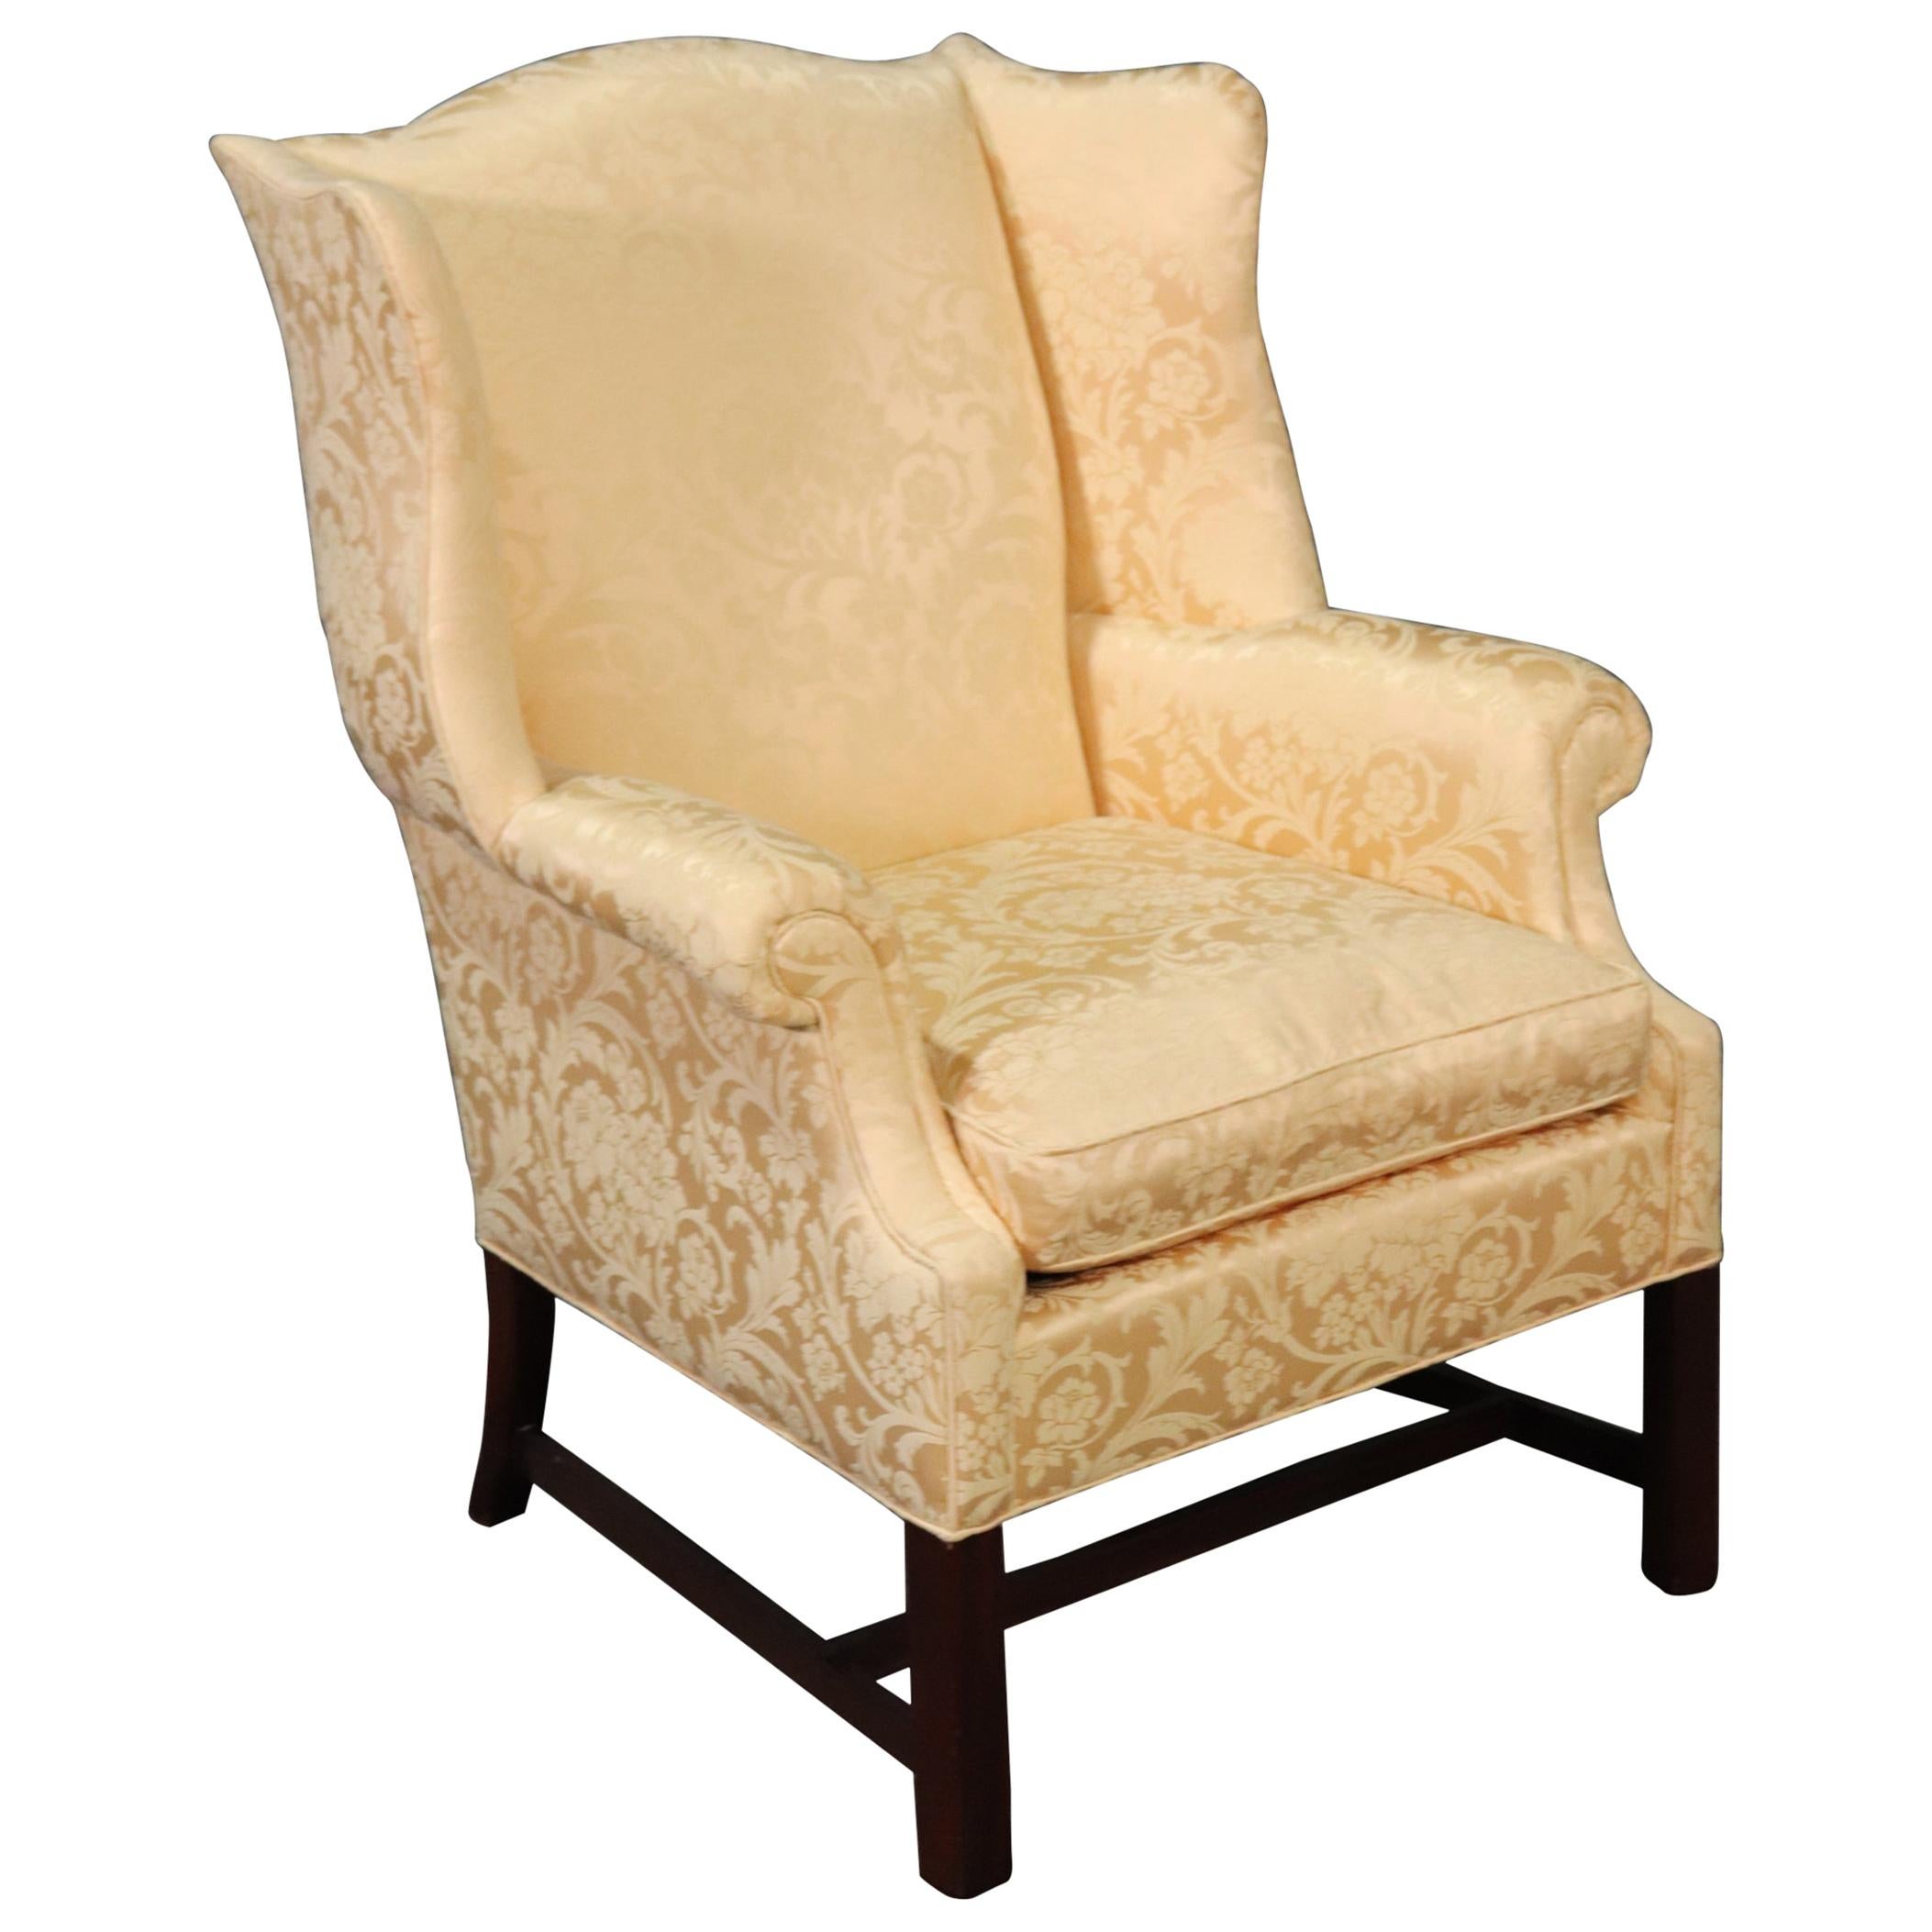 Newport Style Solid Mahogany Wing Chair by Hickory Chair Company